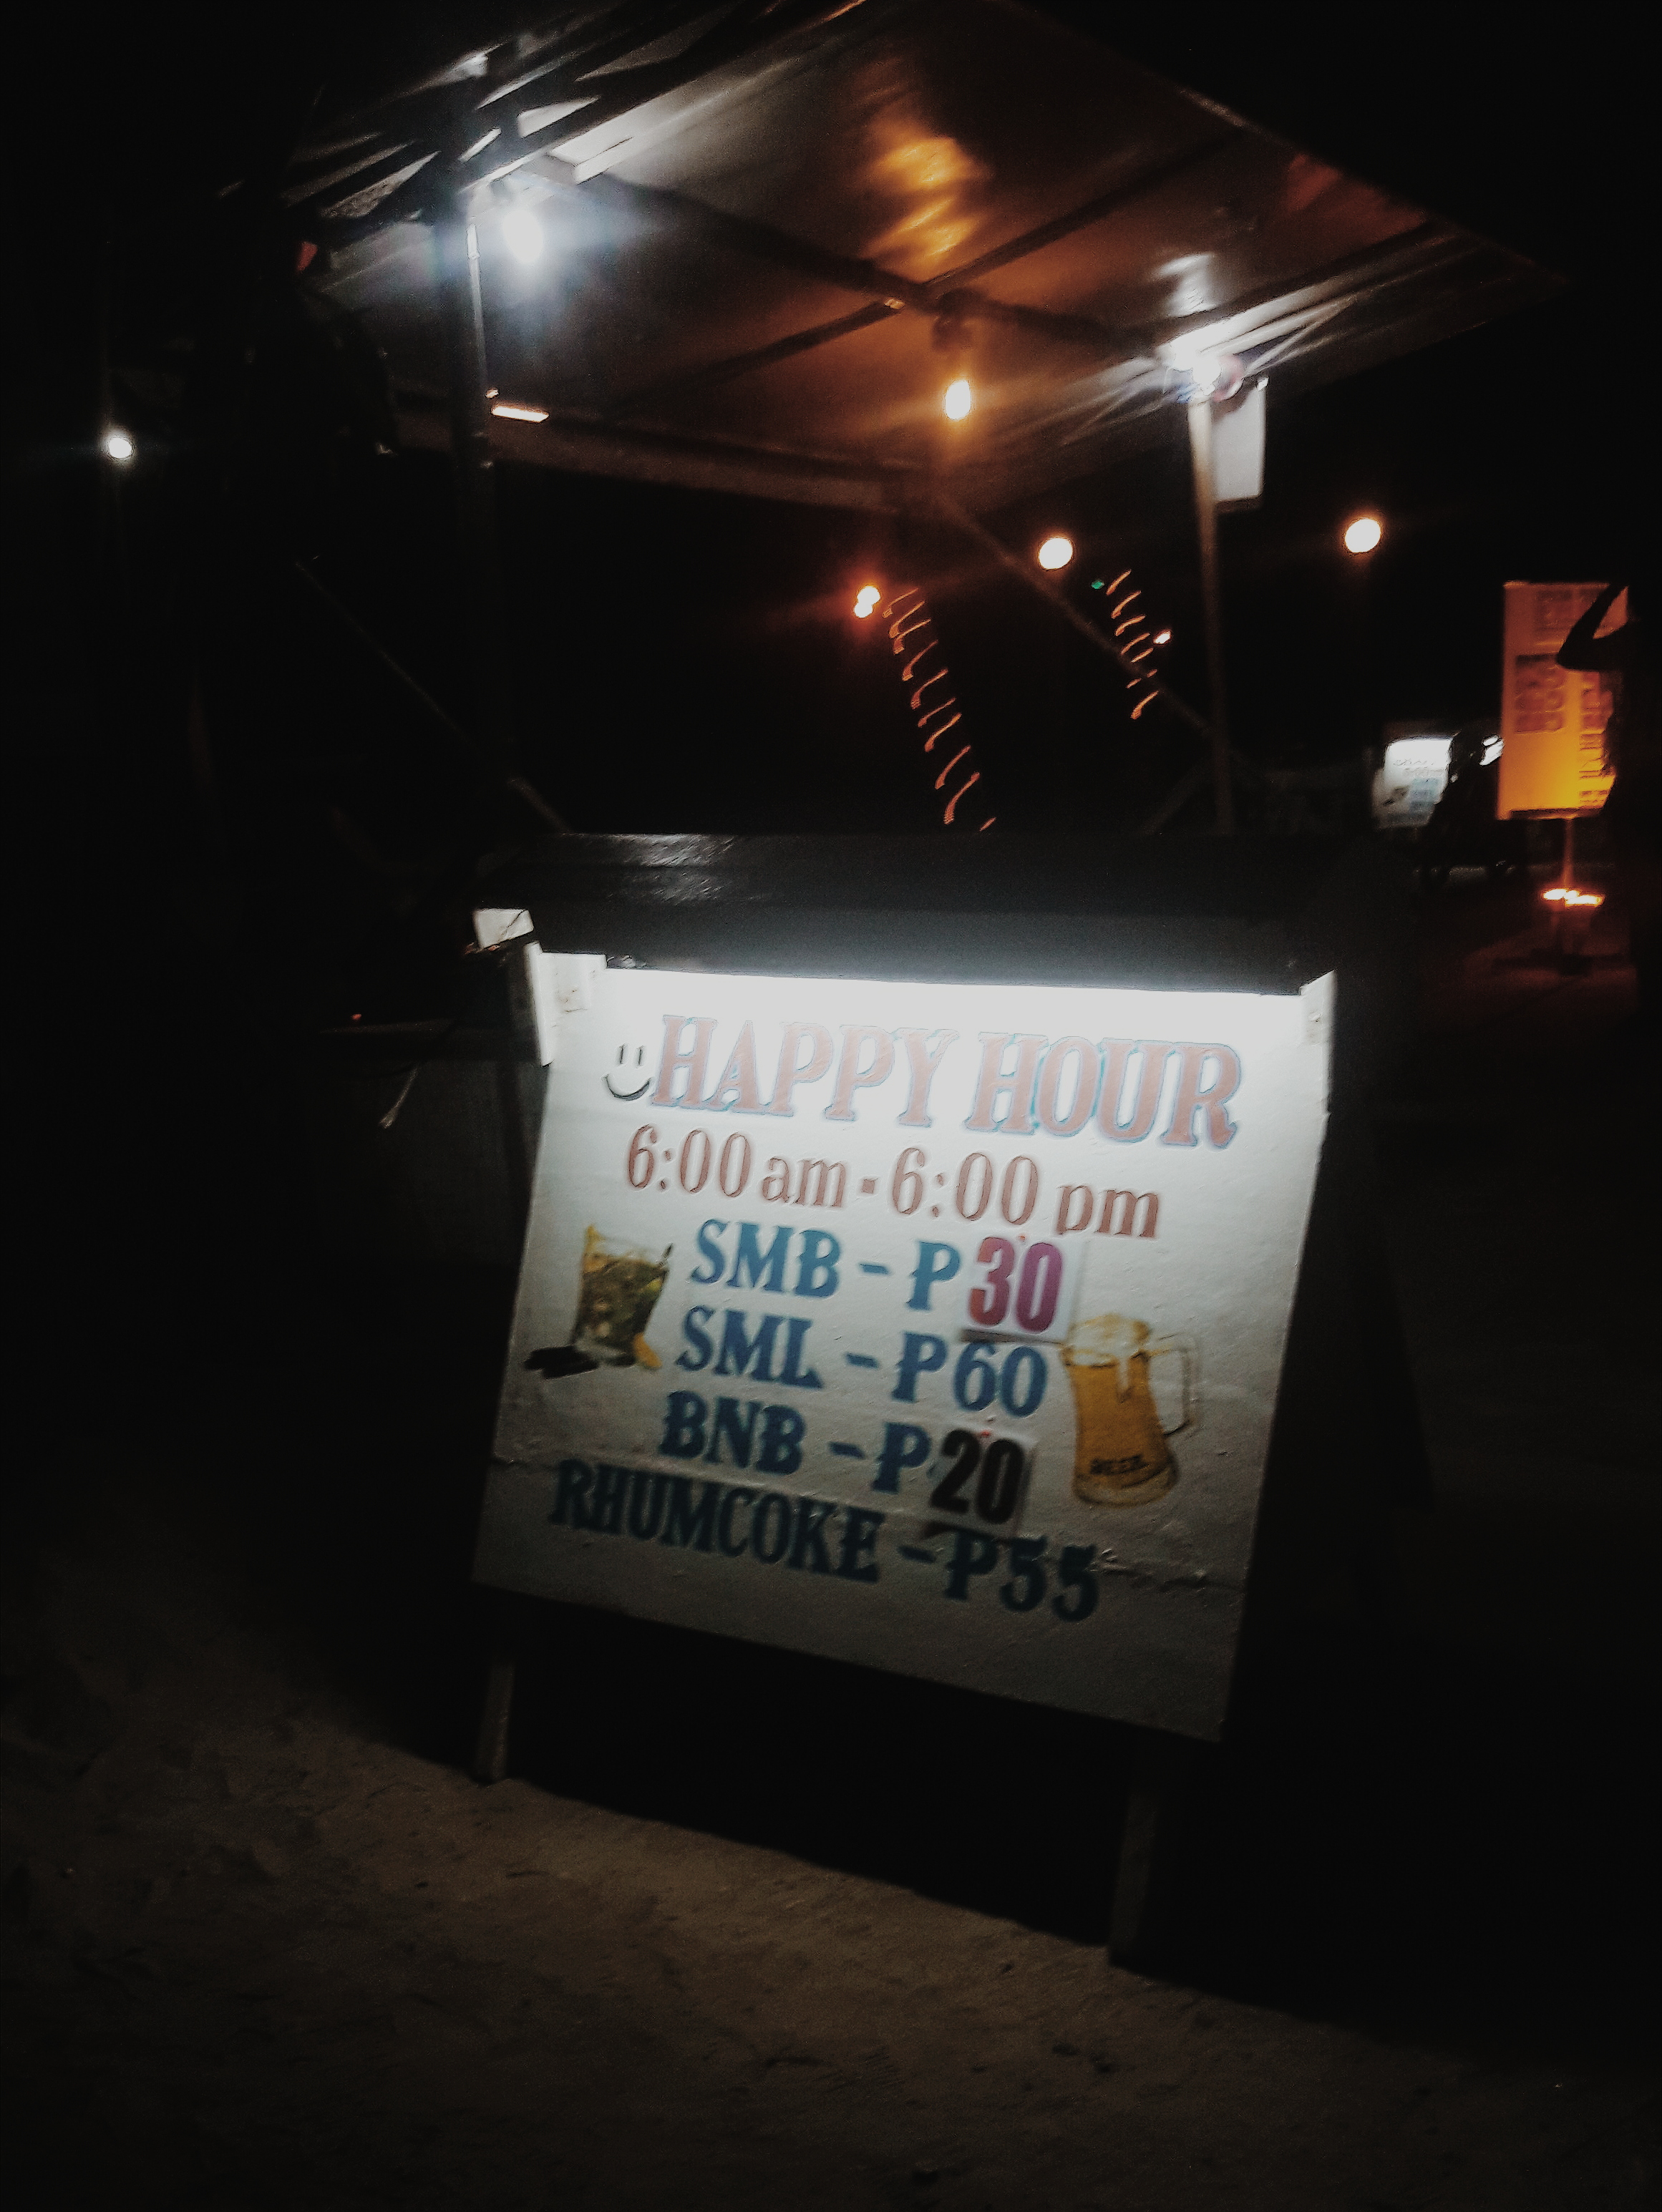 Bohol's booze culture is so lowkey, happy hours can last as long as half a day.